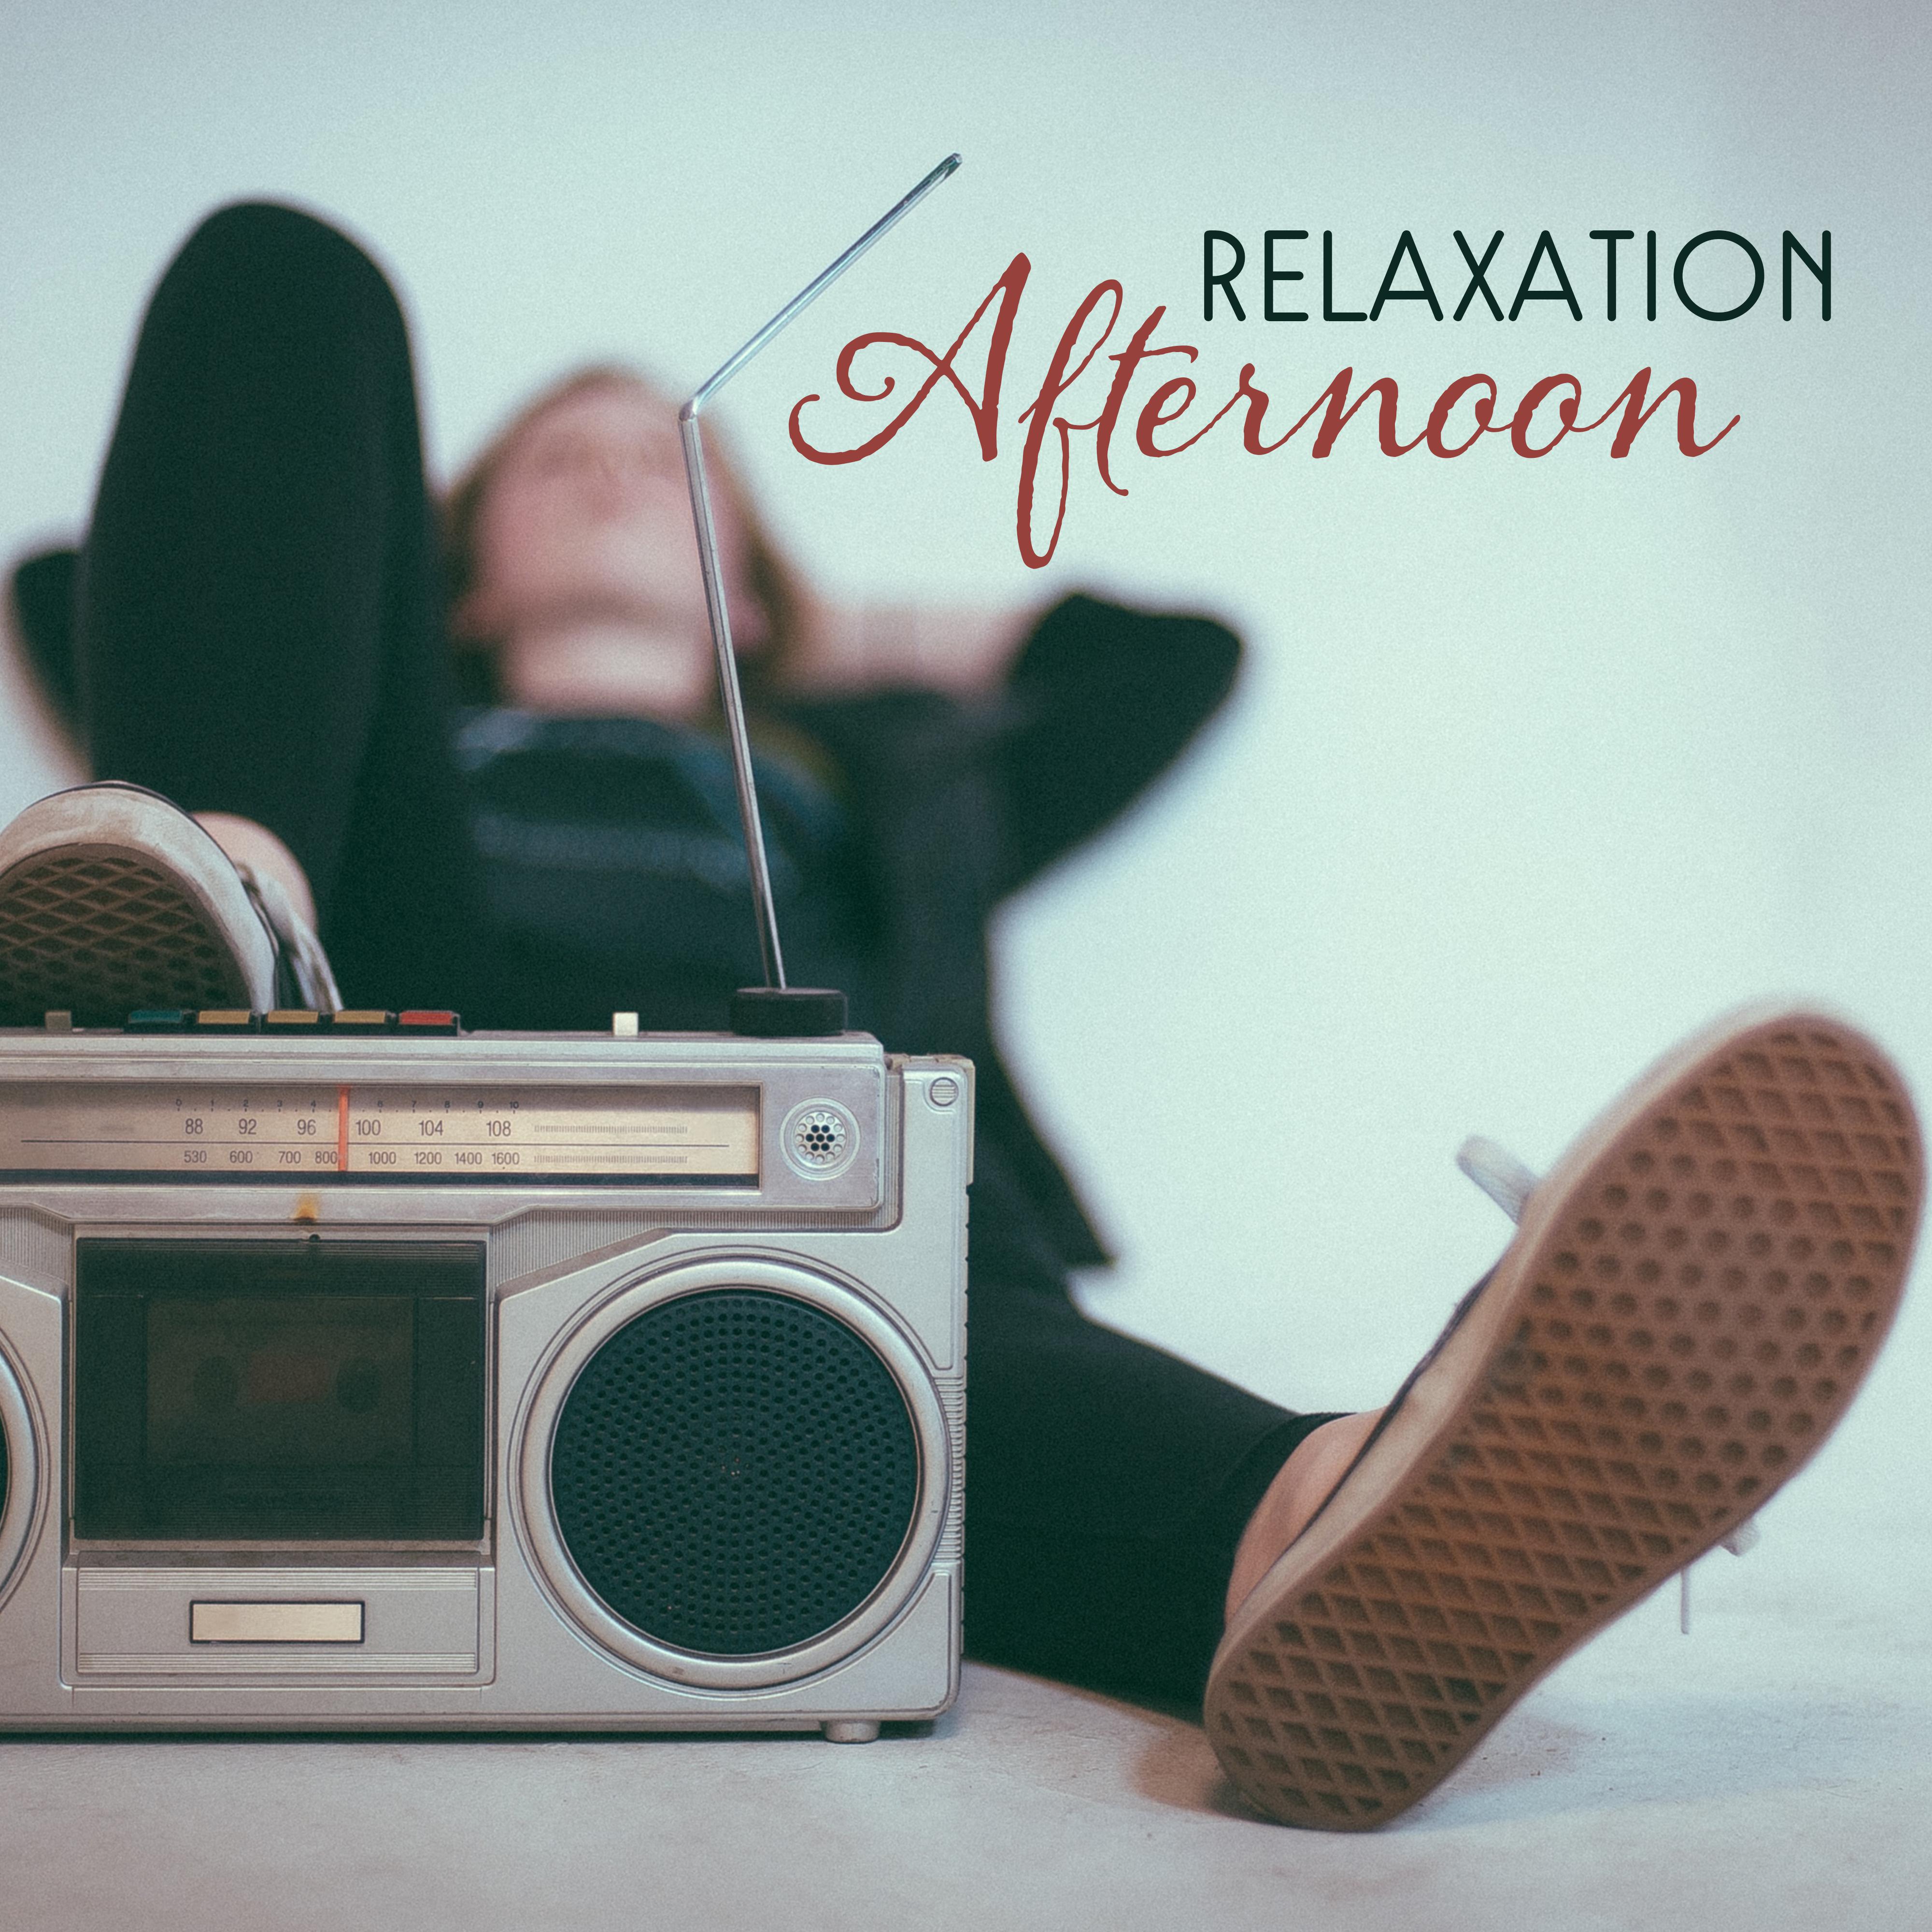 Relaxation Afternoon  Jazz for Restaurant, Cafe Music, Instrumental Sounds to Rest, Meeting with Family, Time to Dinner, Smooth Jazz